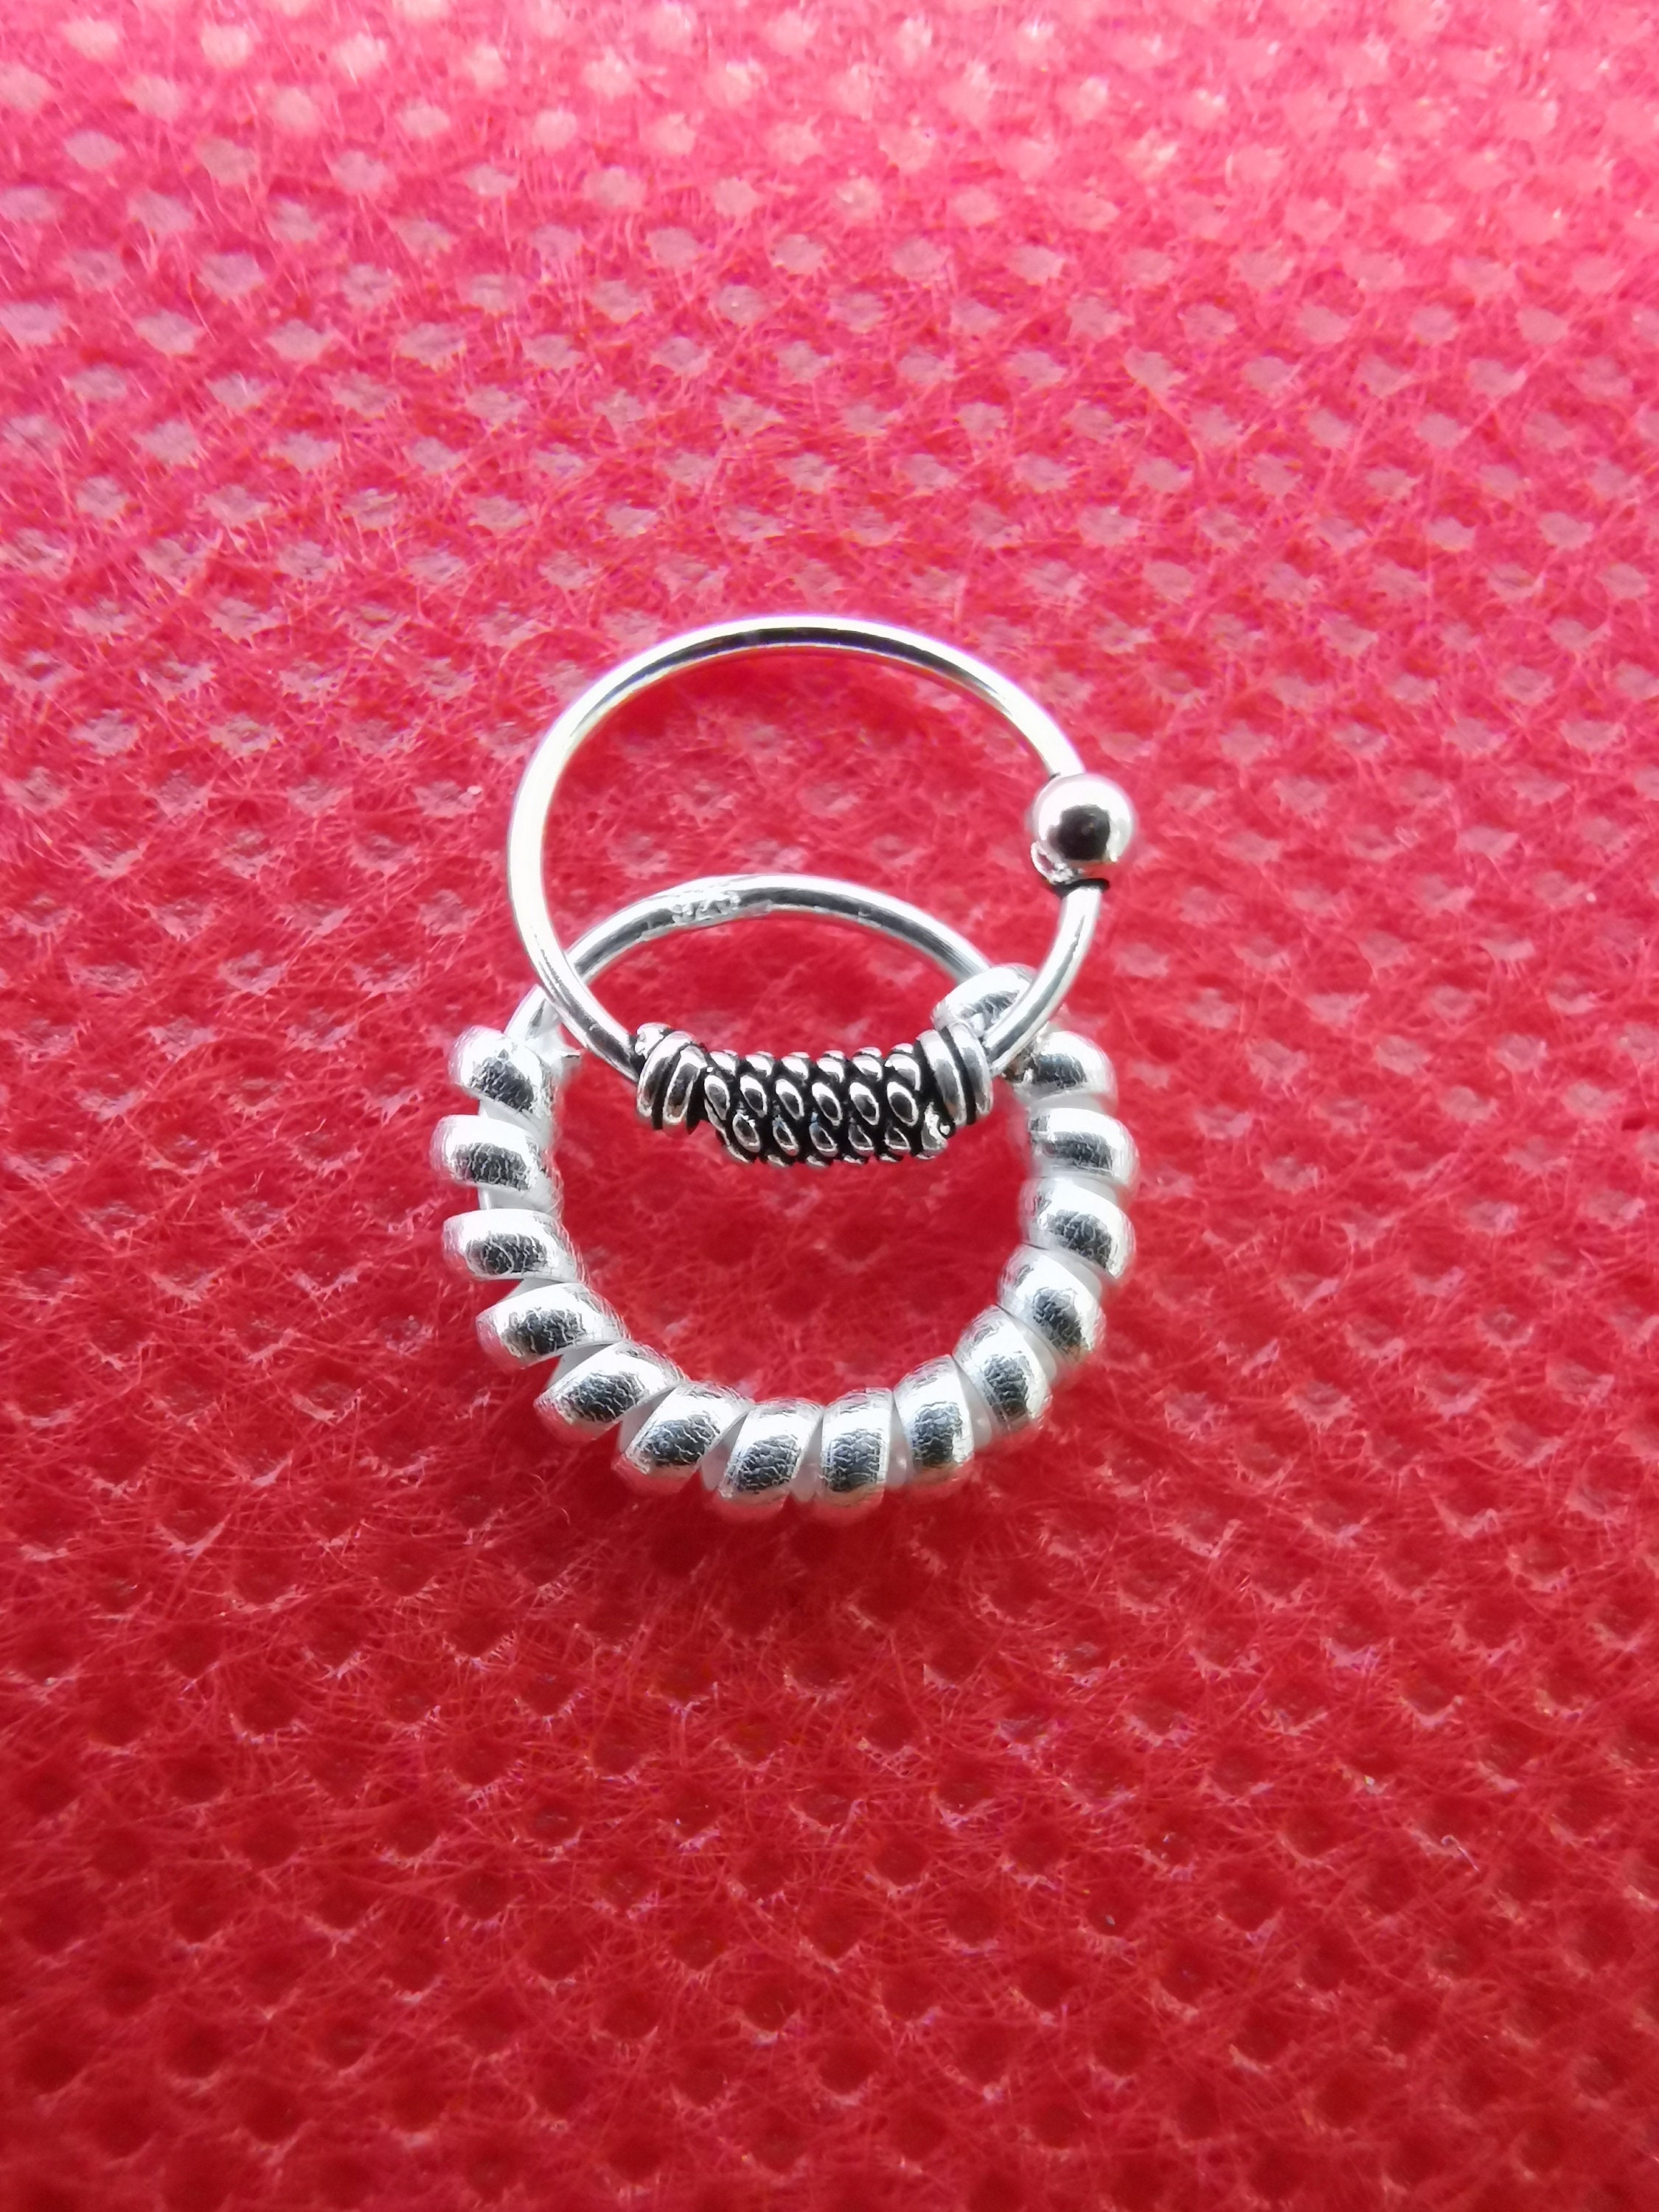 buy 1 get 1 FREE Sterling silver 925 +FREE shipping small ring for NOSE and orbital can be use for different piercing l1-l10